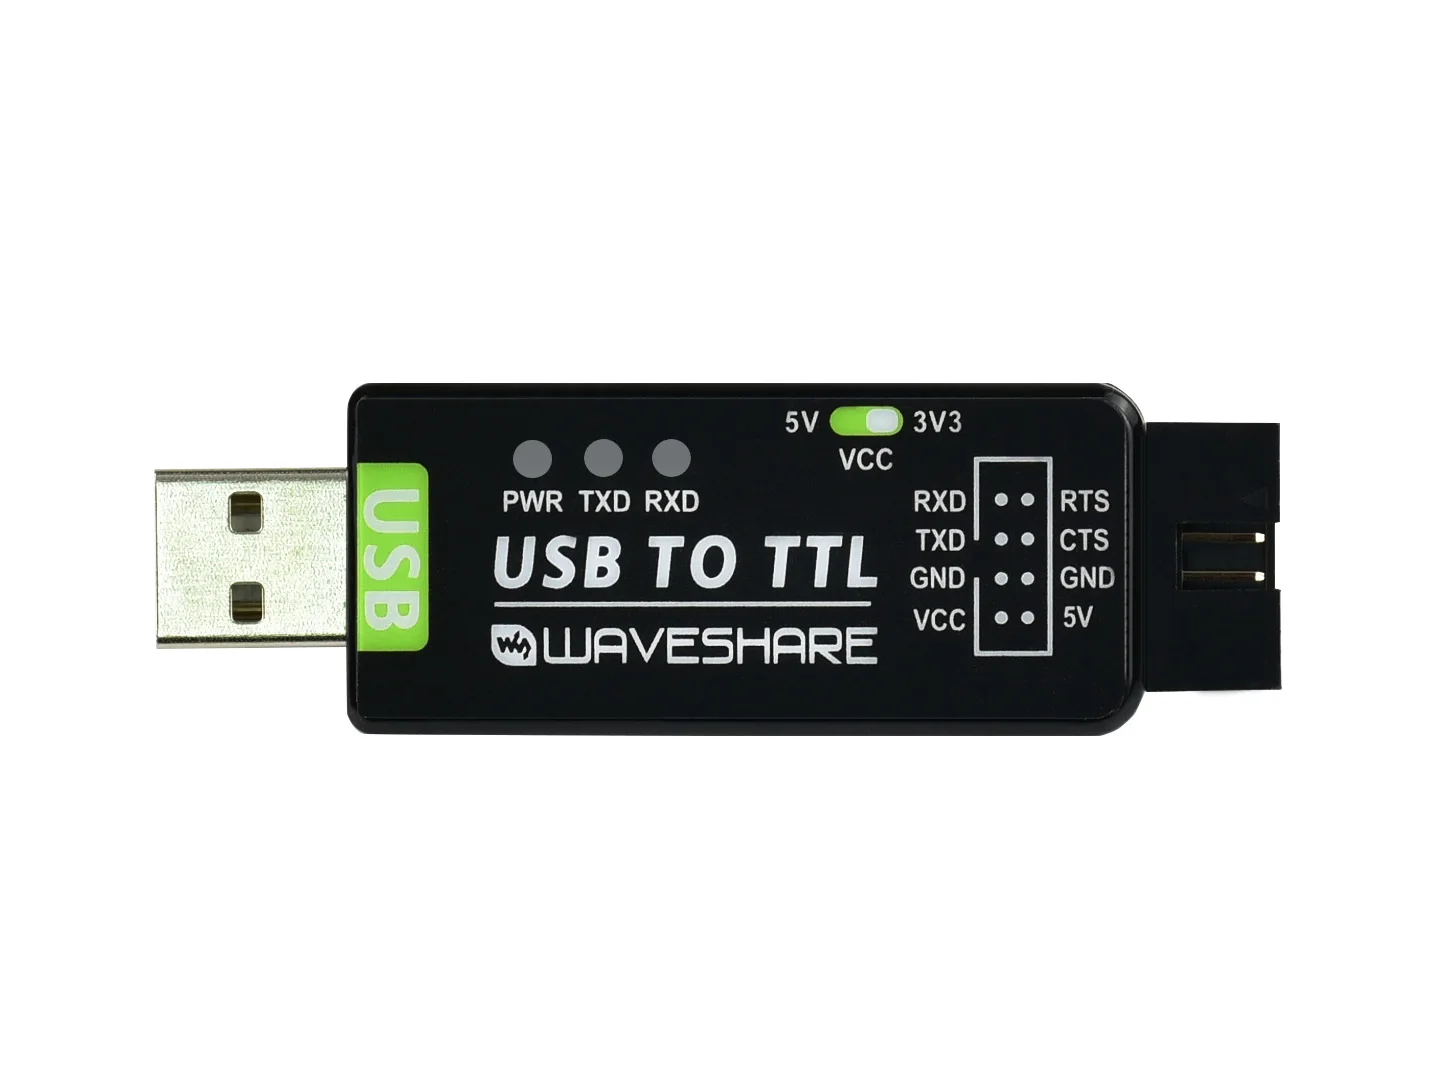 

Waveshare Industrial USB TO TTL Converter, Original FT232RL, Multi Protection & Systems Support